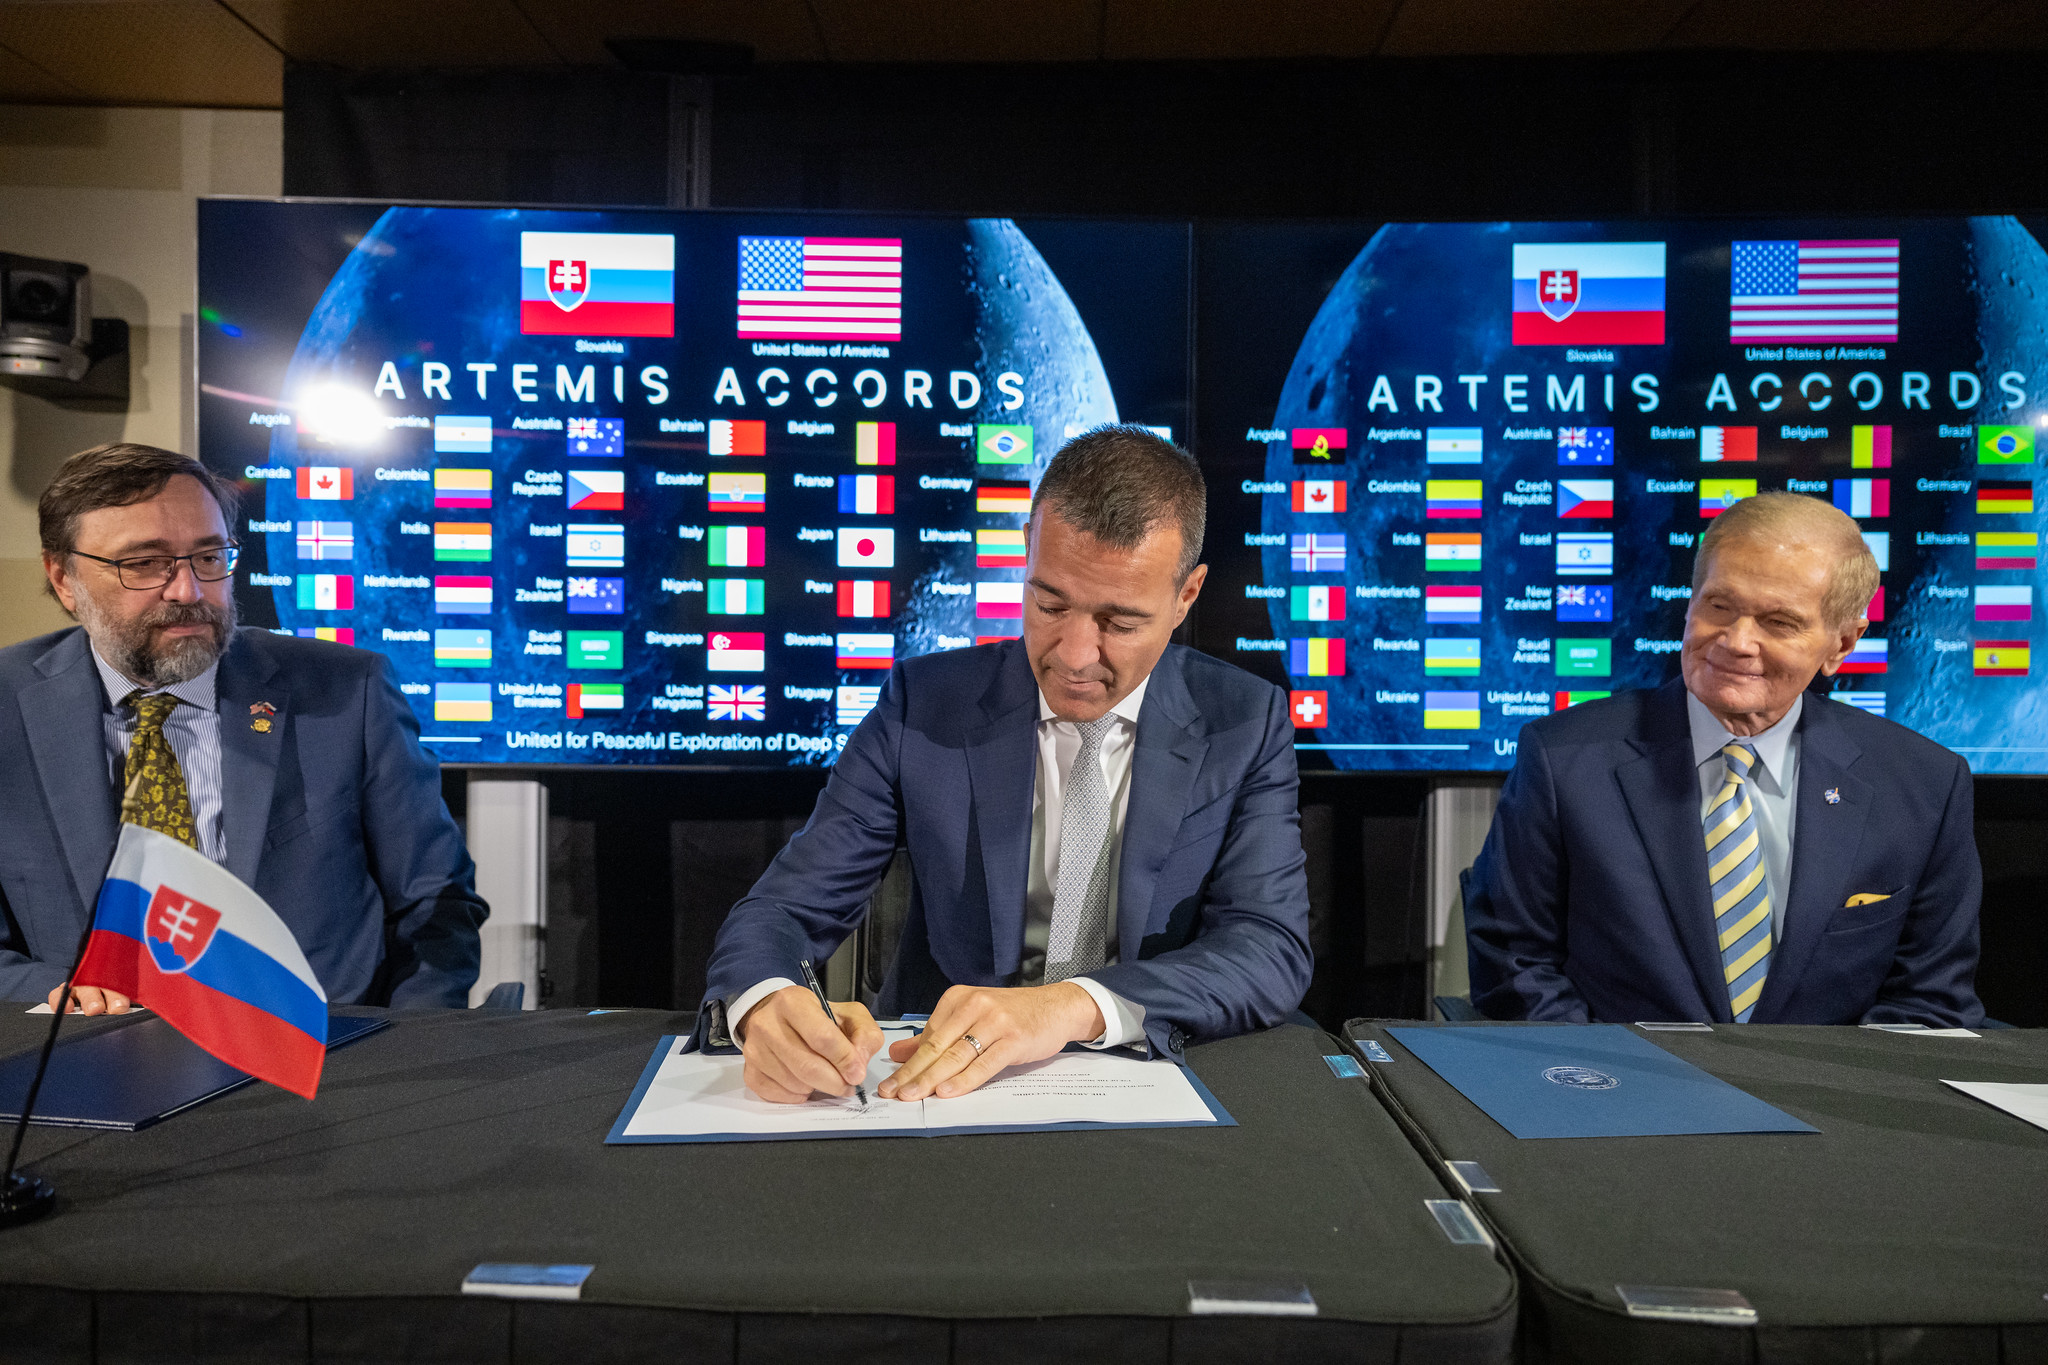 Peru and Slovakia sign the Artemis Accords